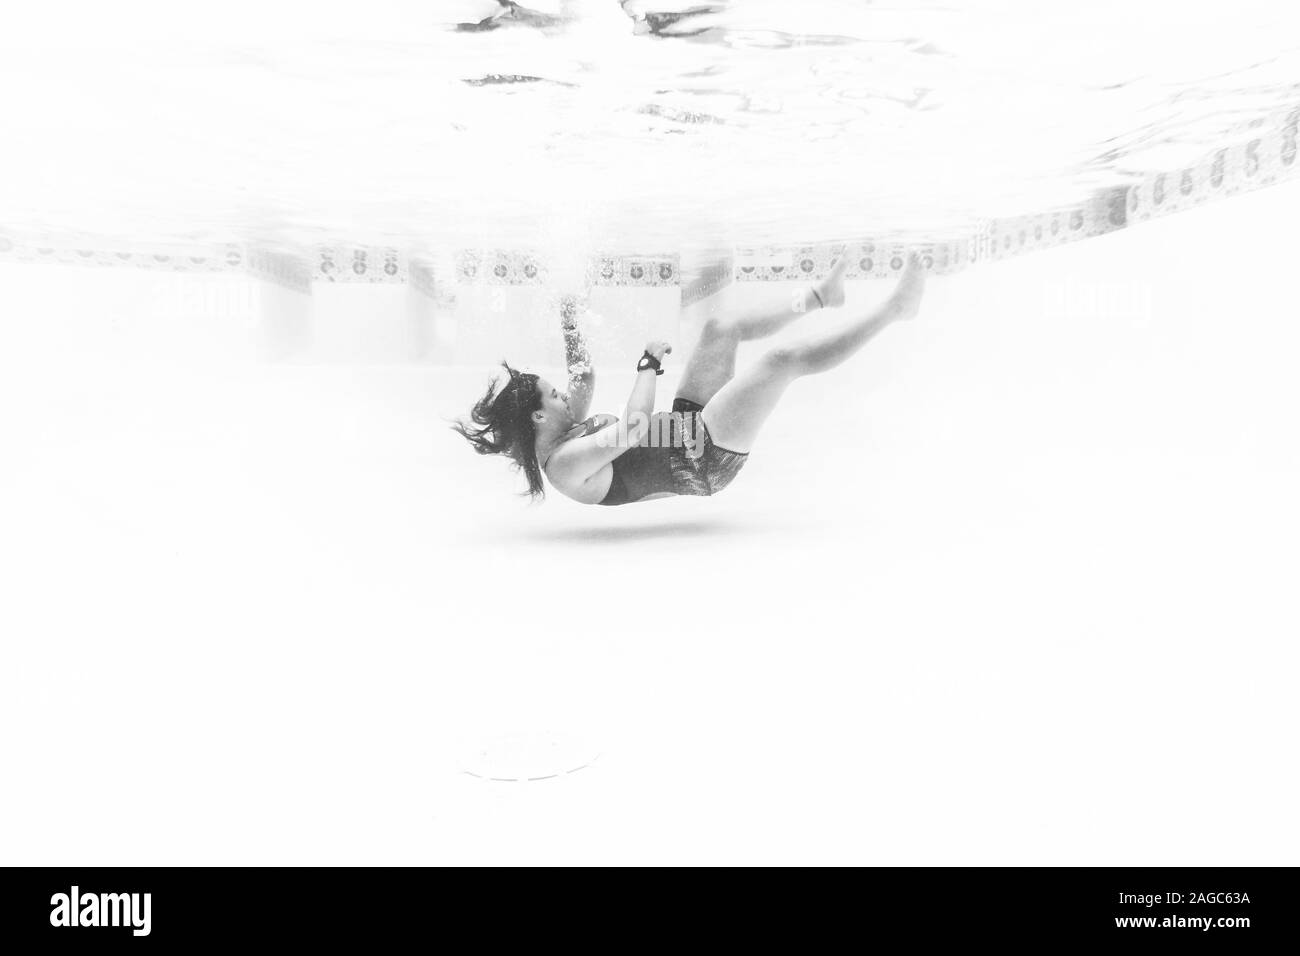 WACO, UNITED STATES - Jul 11, 2018: Underwater image of life guard falling to the bottom. Stock Photo